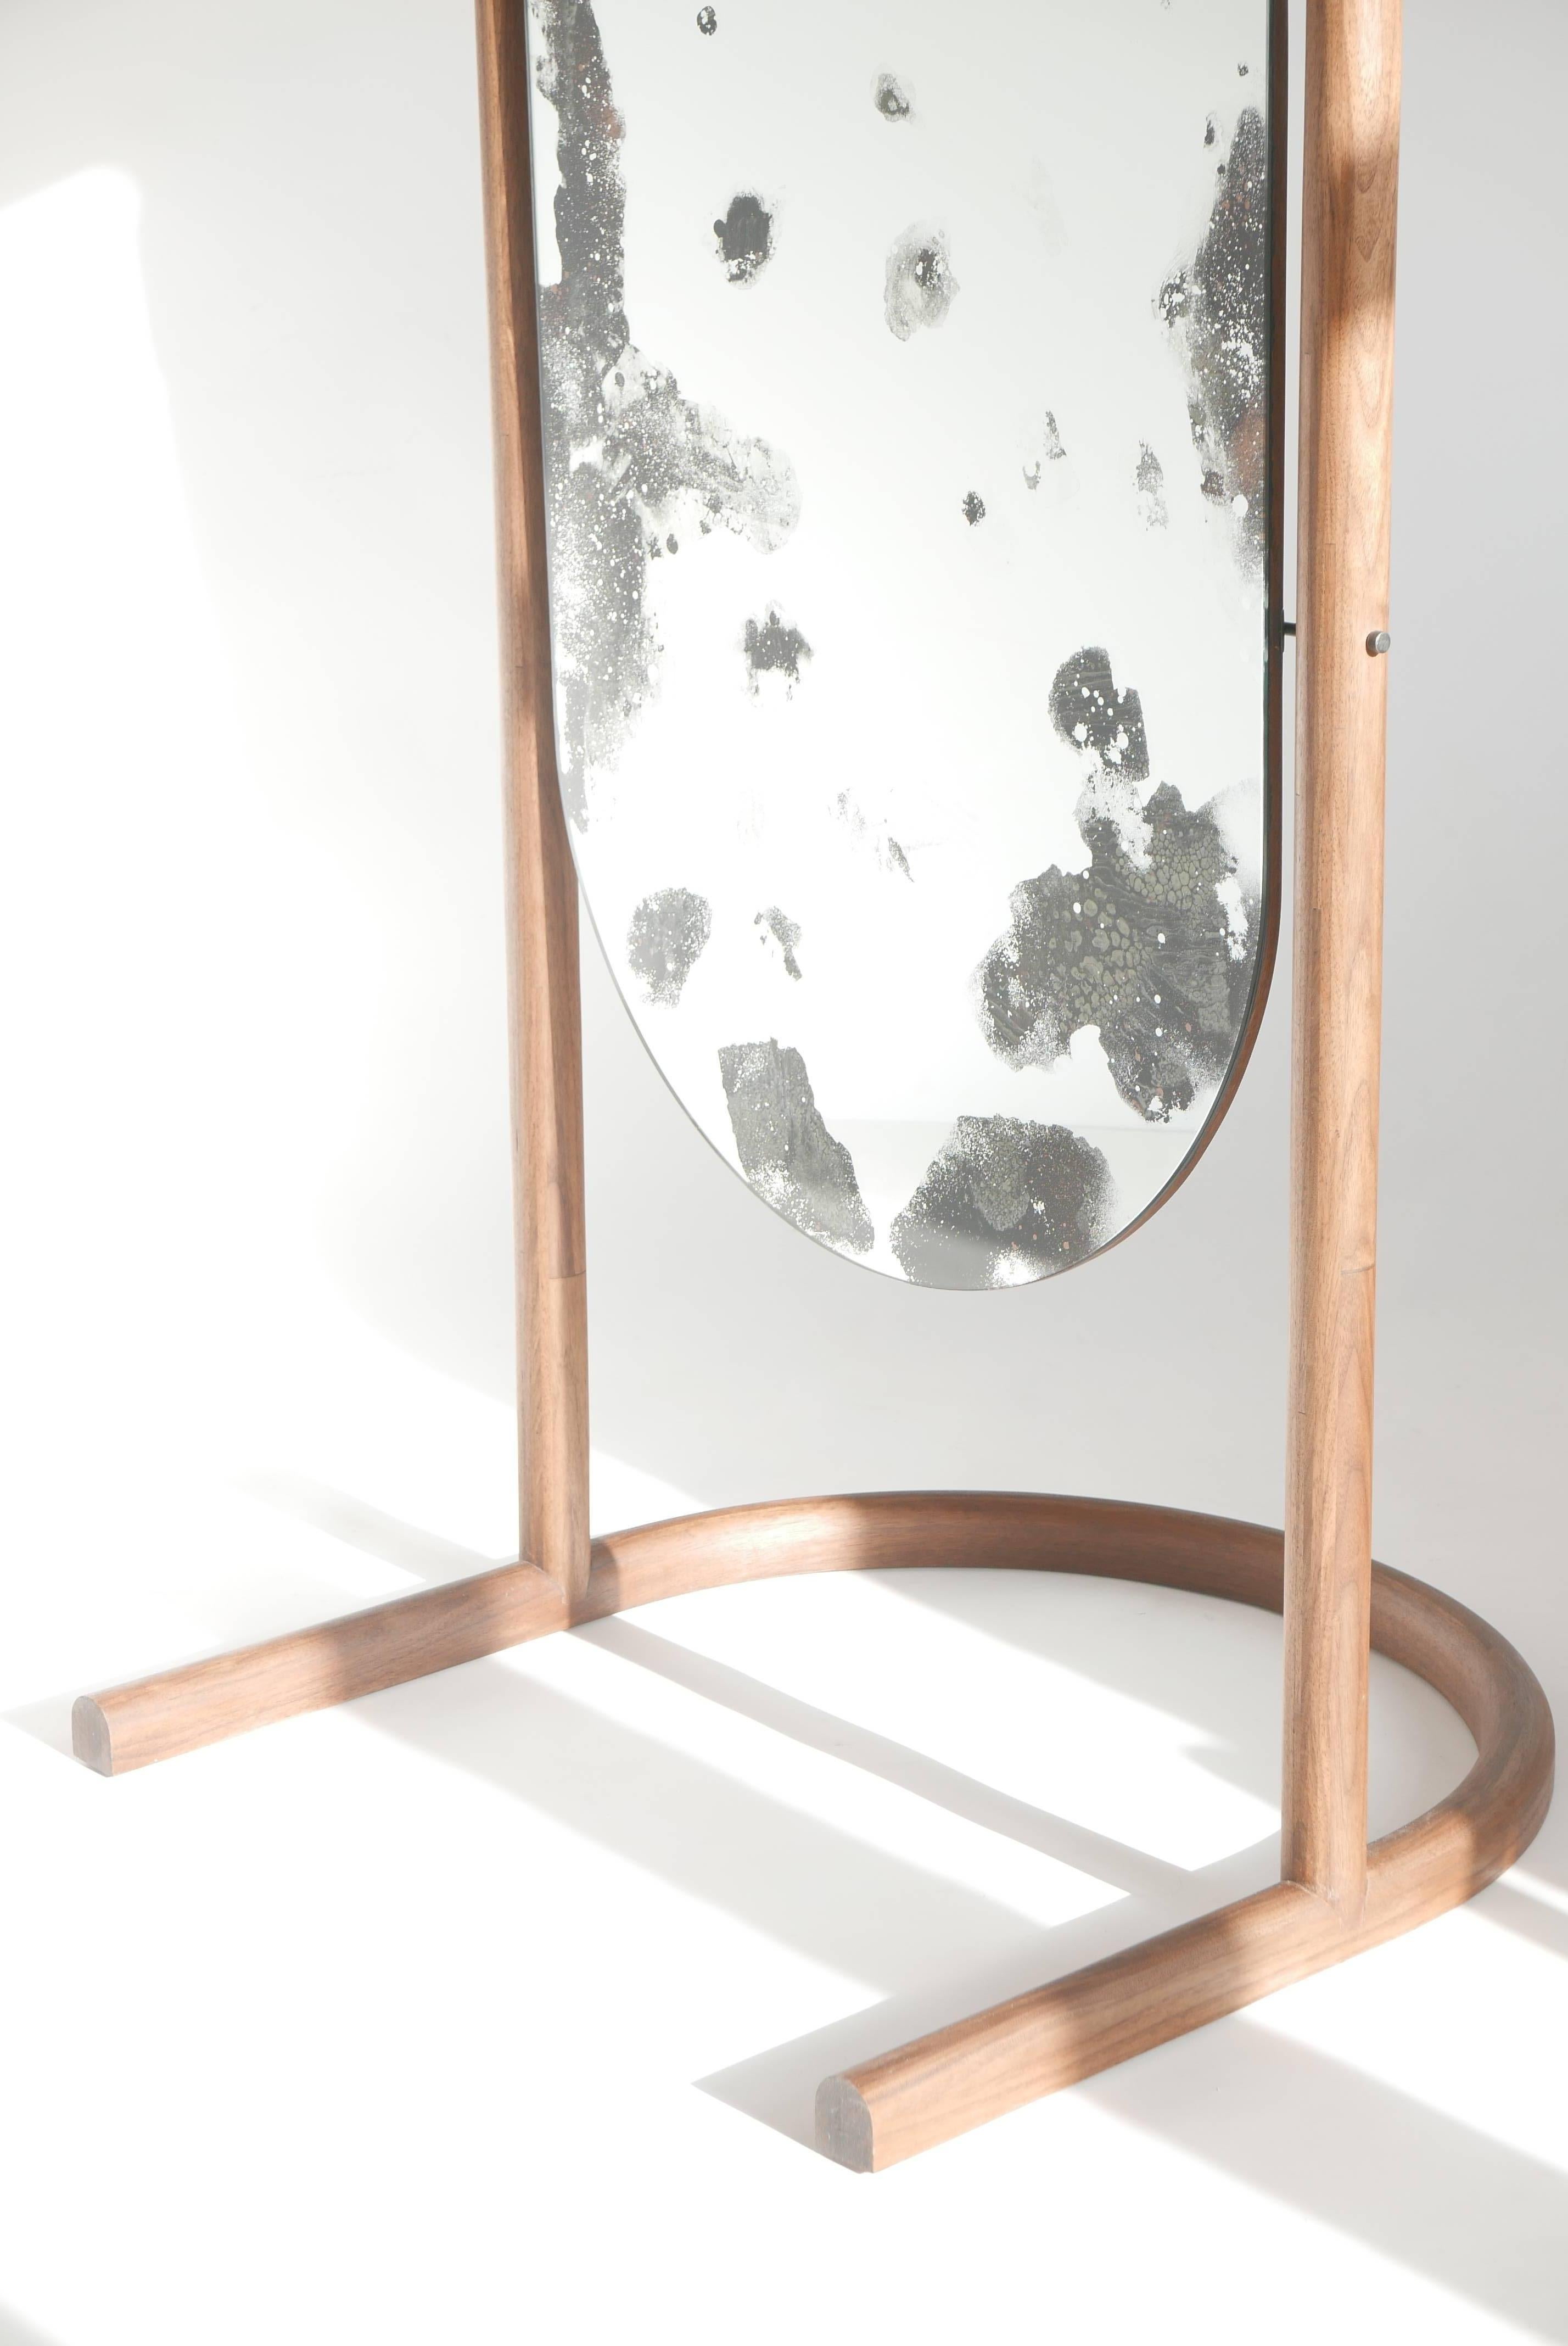 This custom Cheval style pivoting floor mirror is a freestanding version of our wall-hanging Oxbow mirror.  

Our Oxbow mirror combines a perfect arc, mystic mirror effects, and a simple platform for display or function. The oxbow form is derived